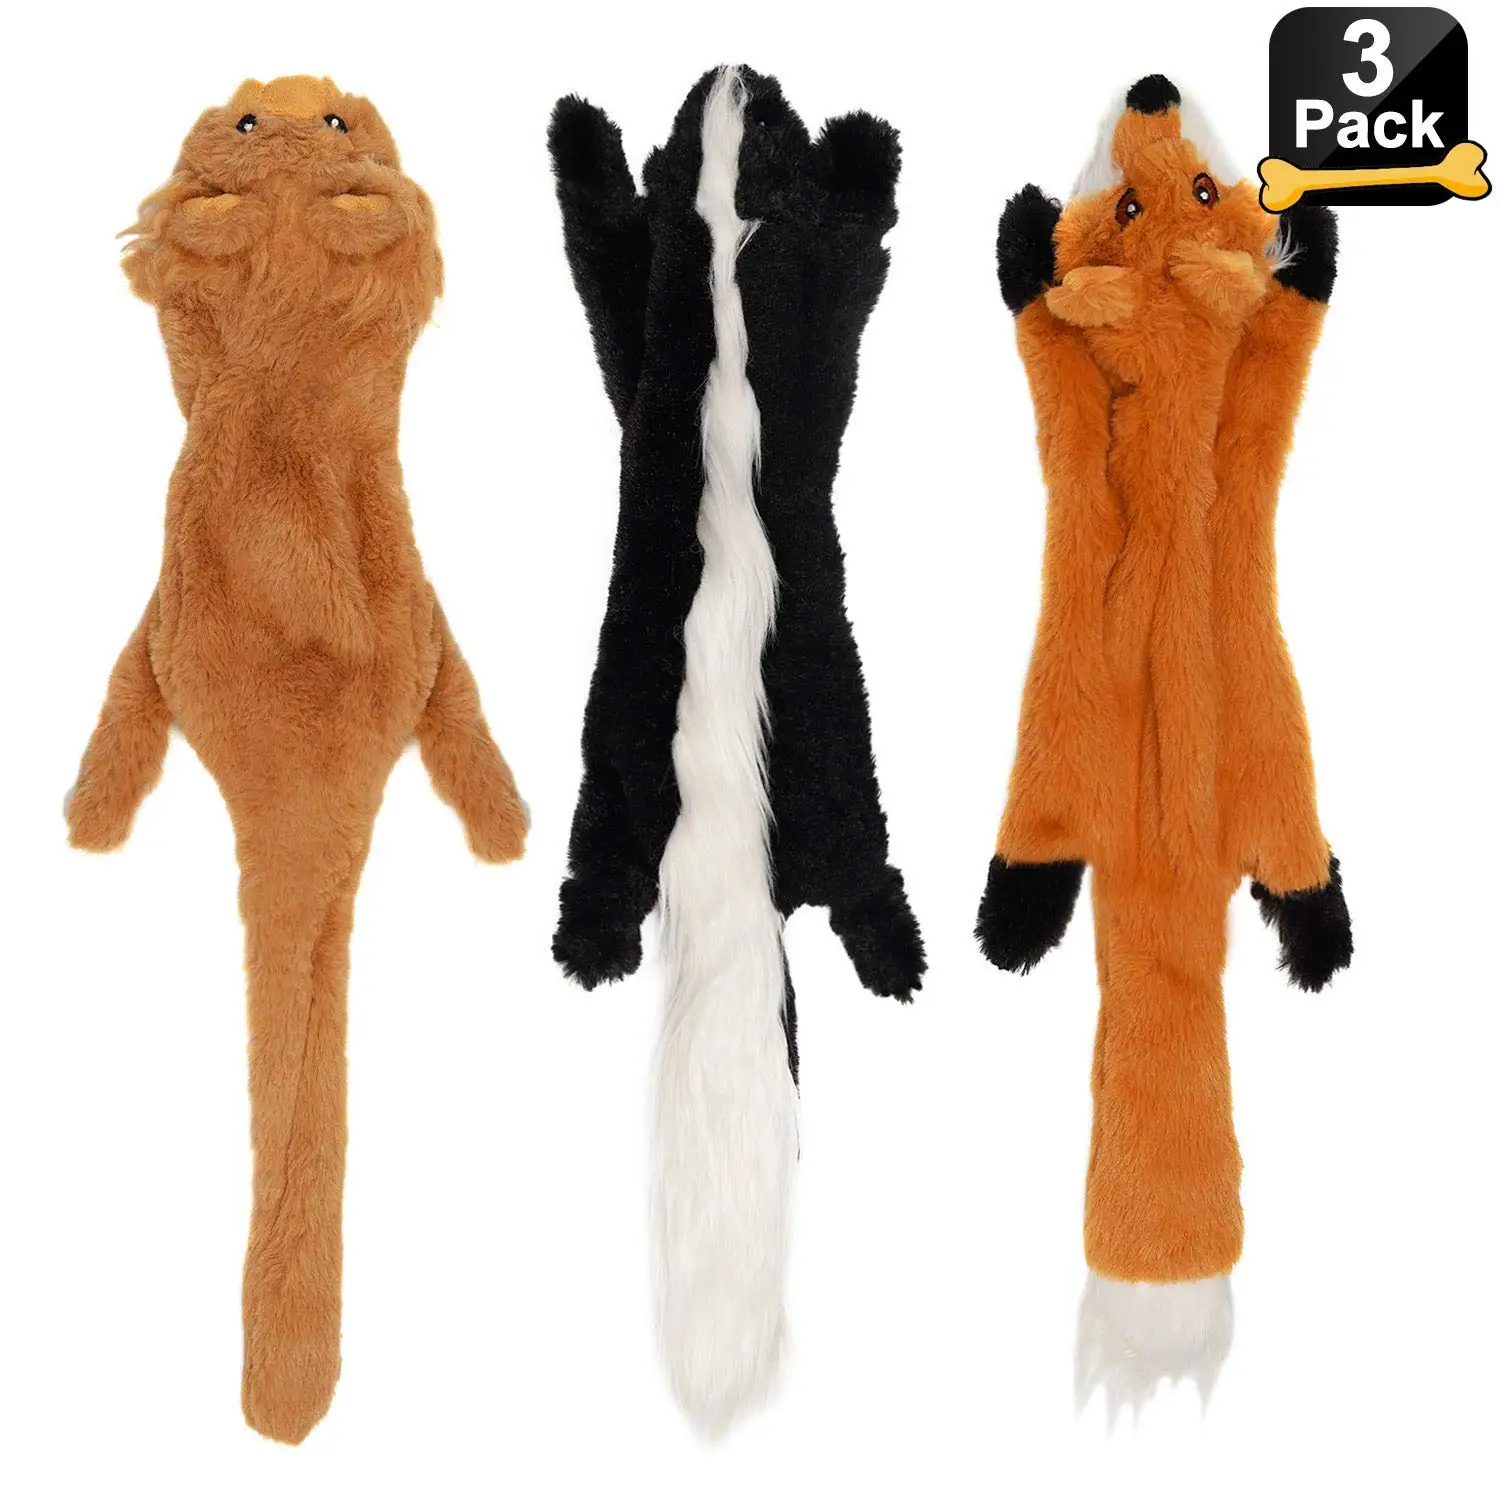 squeakers for dog toys uk